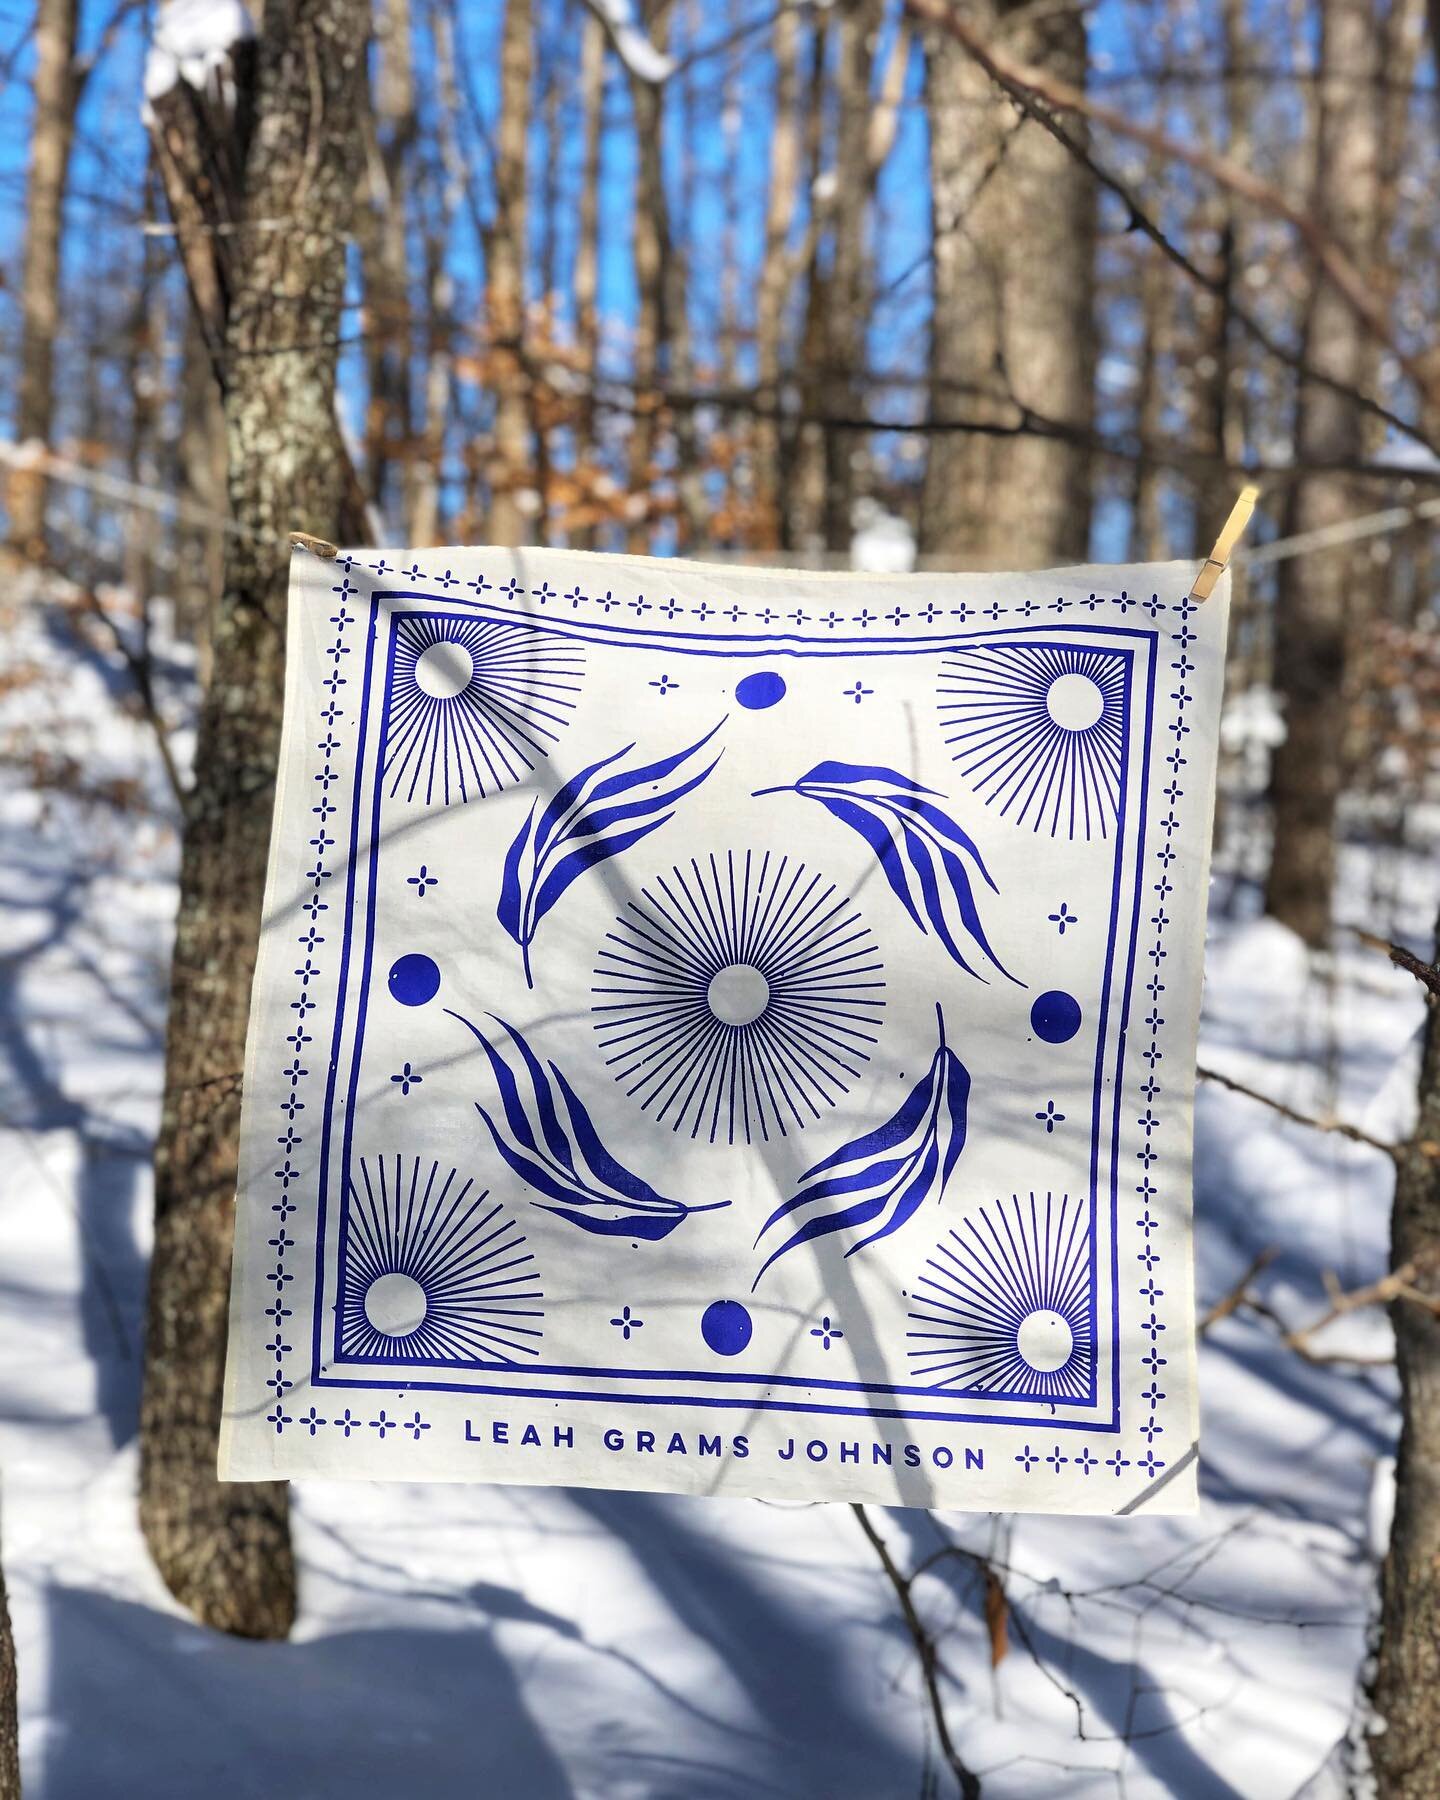 We may be past the snow, but these Prairie Bandanas in sapphire and bone look just as beautiful backed by fields of green. 100% soft cotton, true discharge printed (ink on both sides). Order at the link in my bio, or pick one up in person if you&rsqu